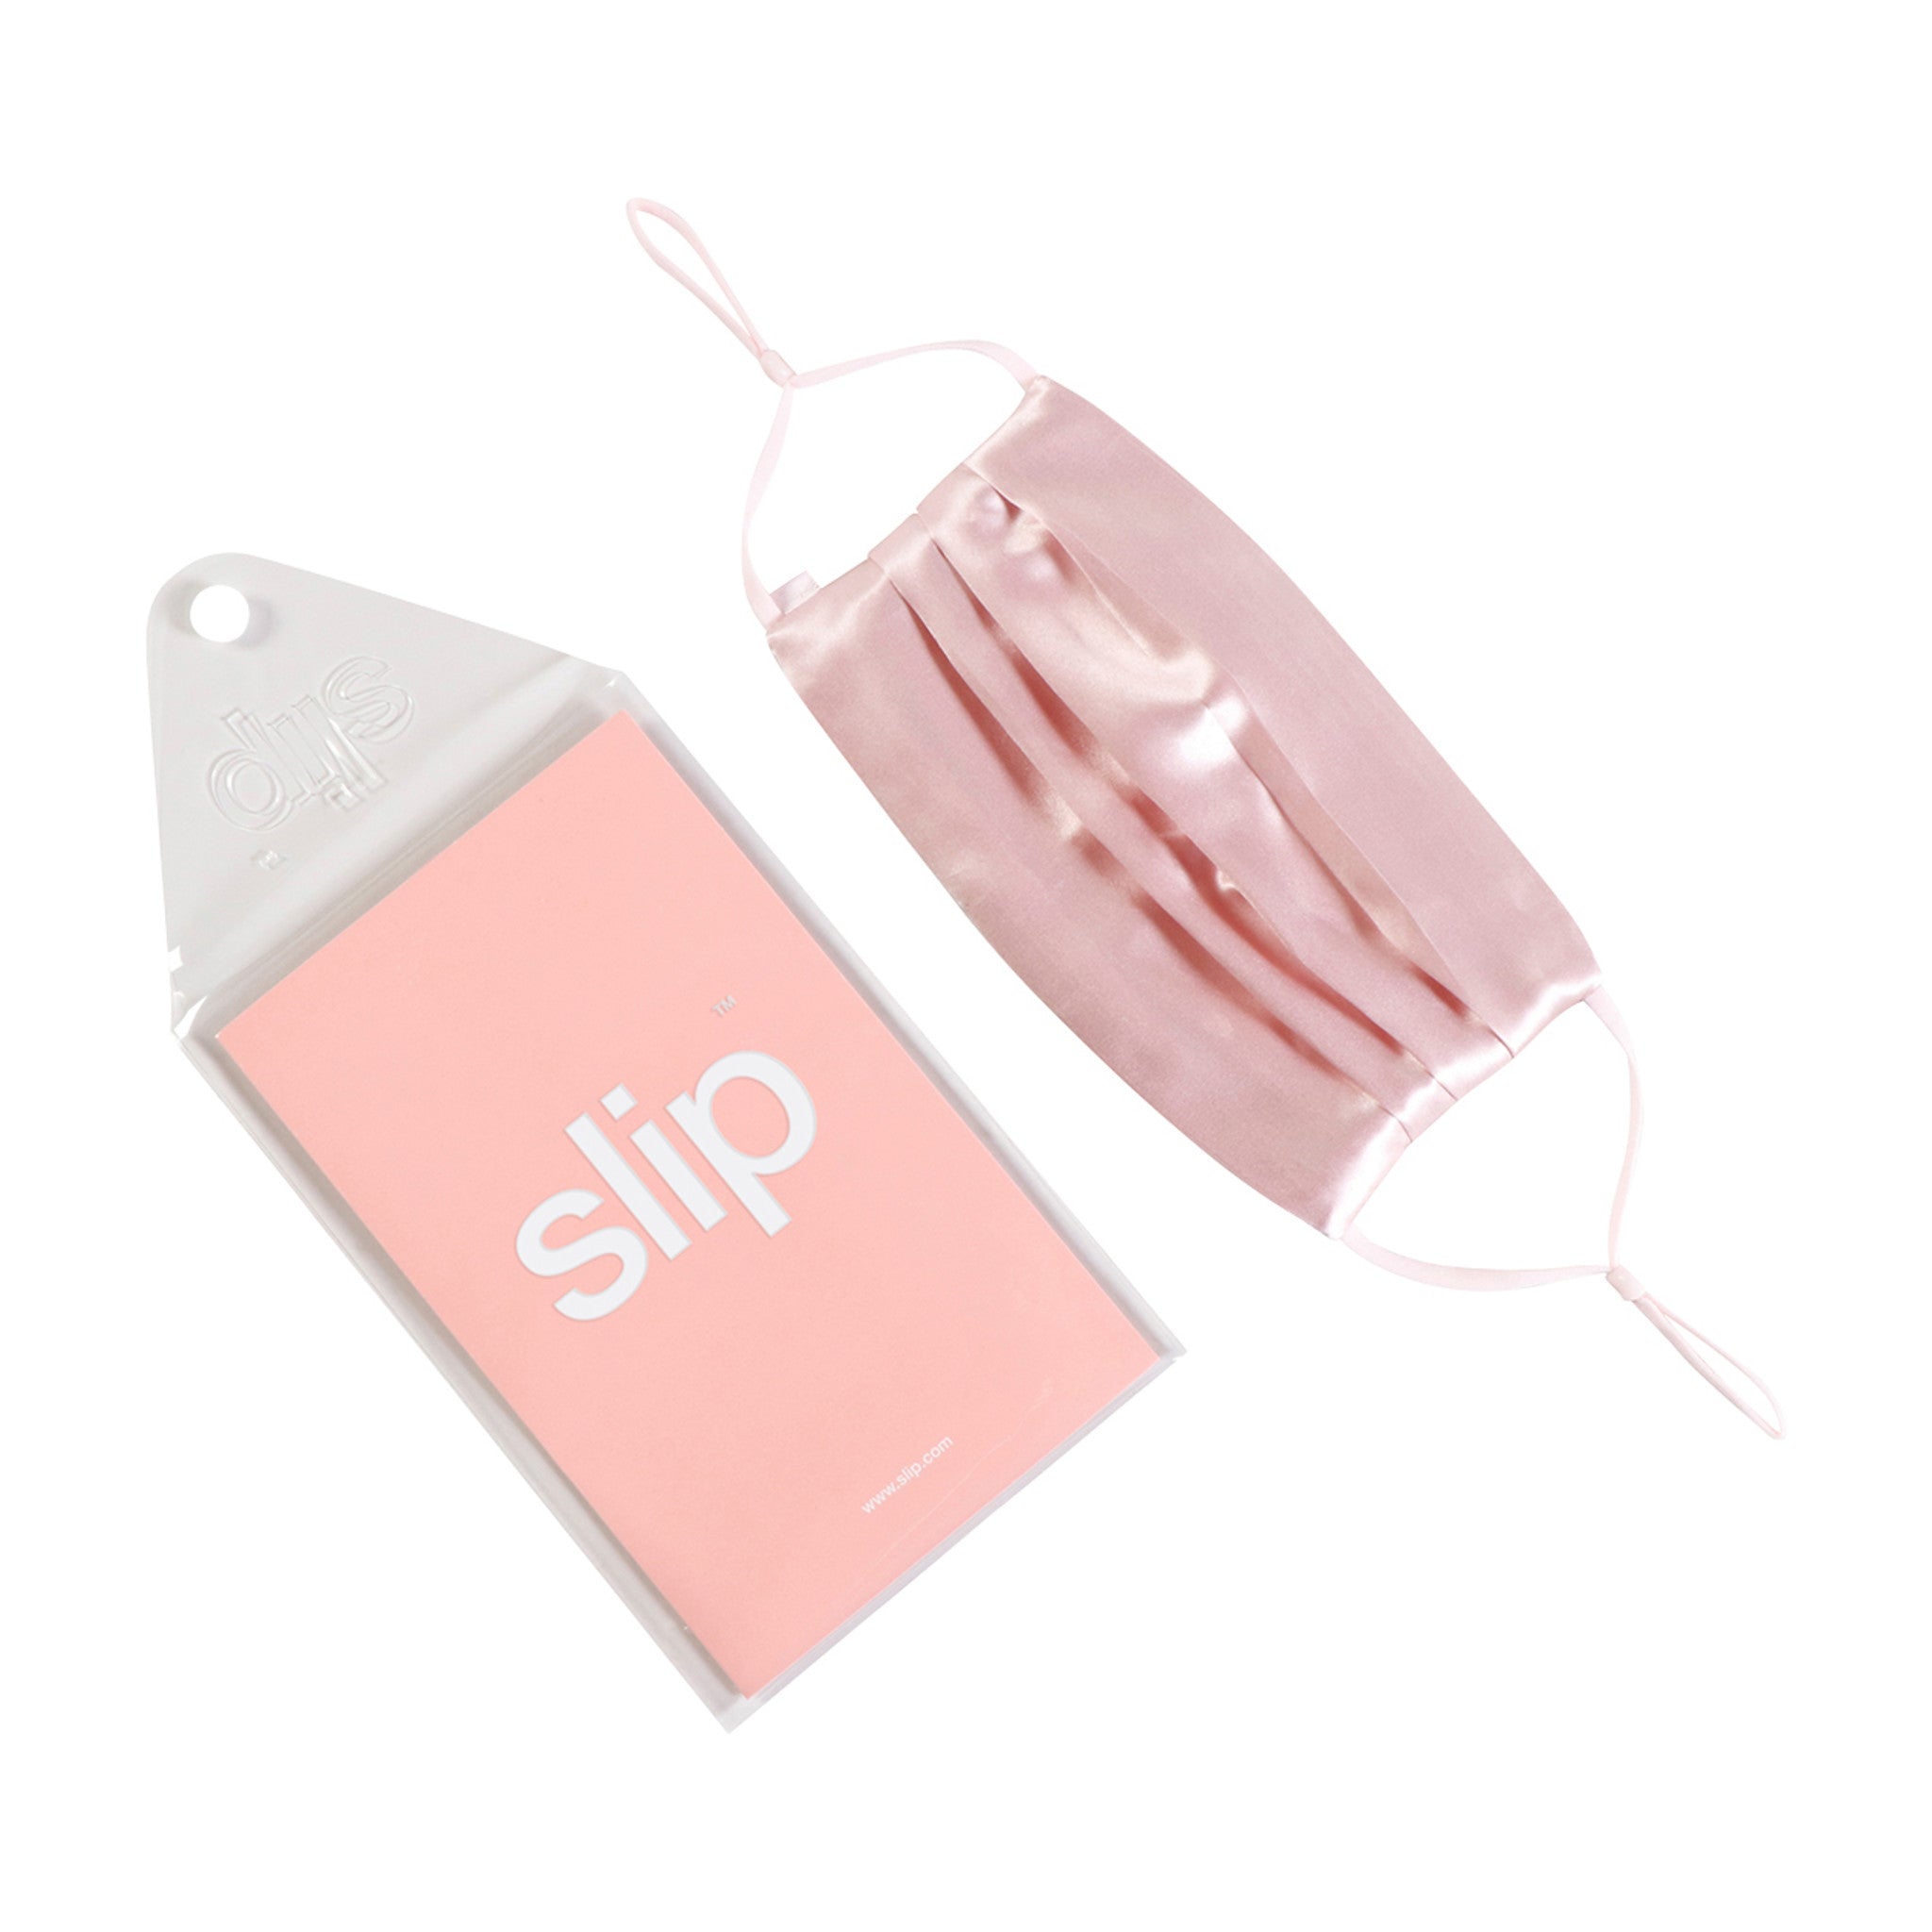 Slip Double-Sided Silk Re-Usable Face Covering Color/Shade variant: Pink main image.